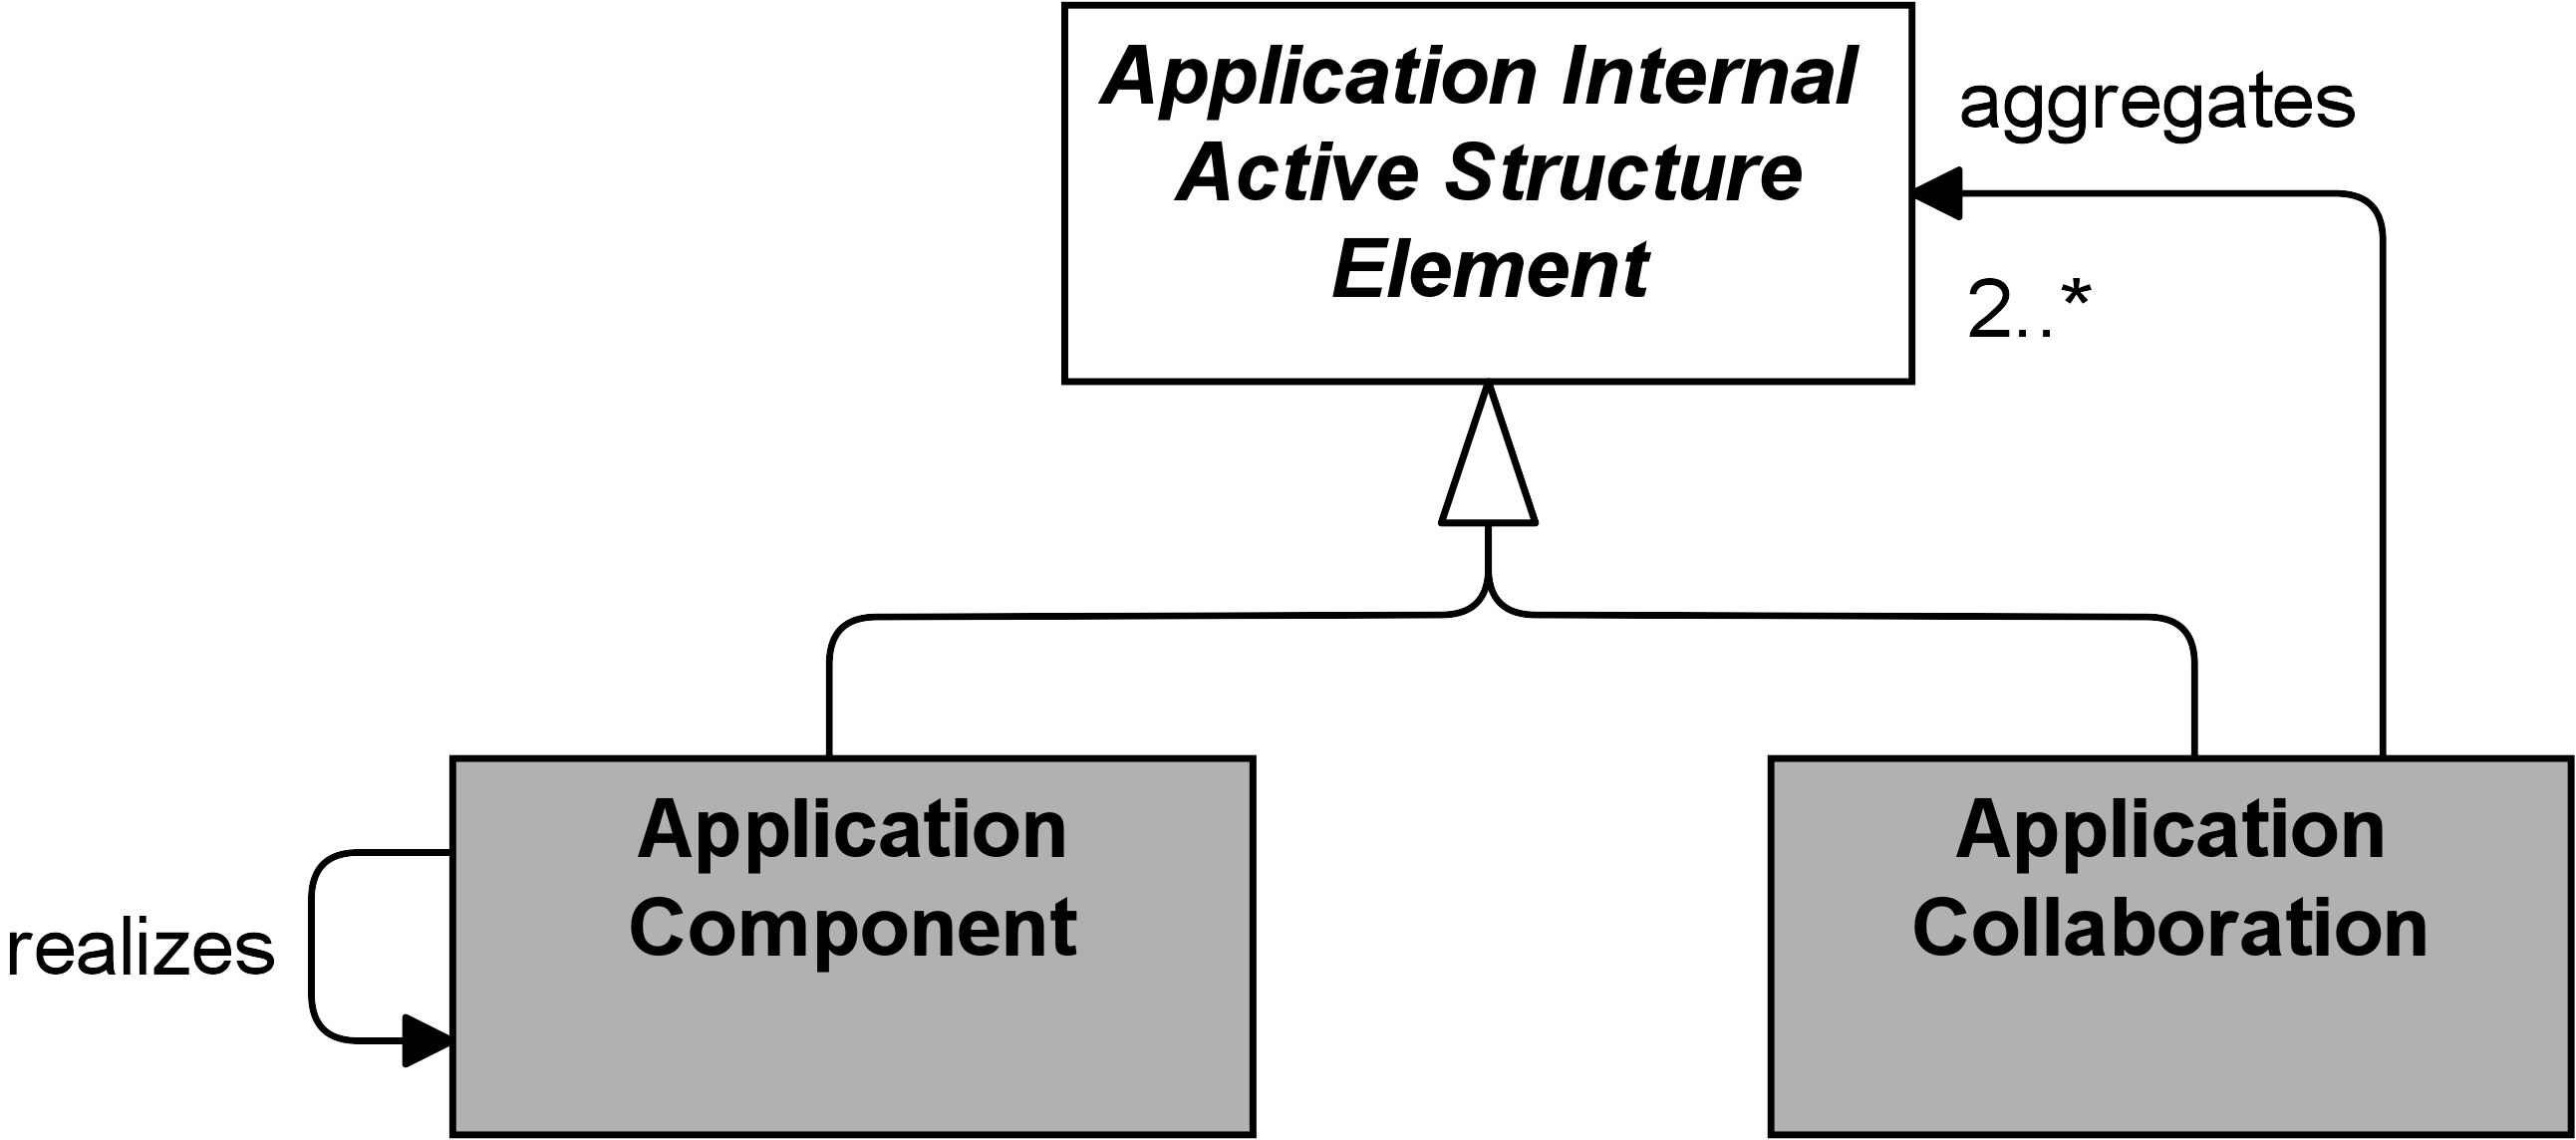 fig Application Internal Active Structure Elements